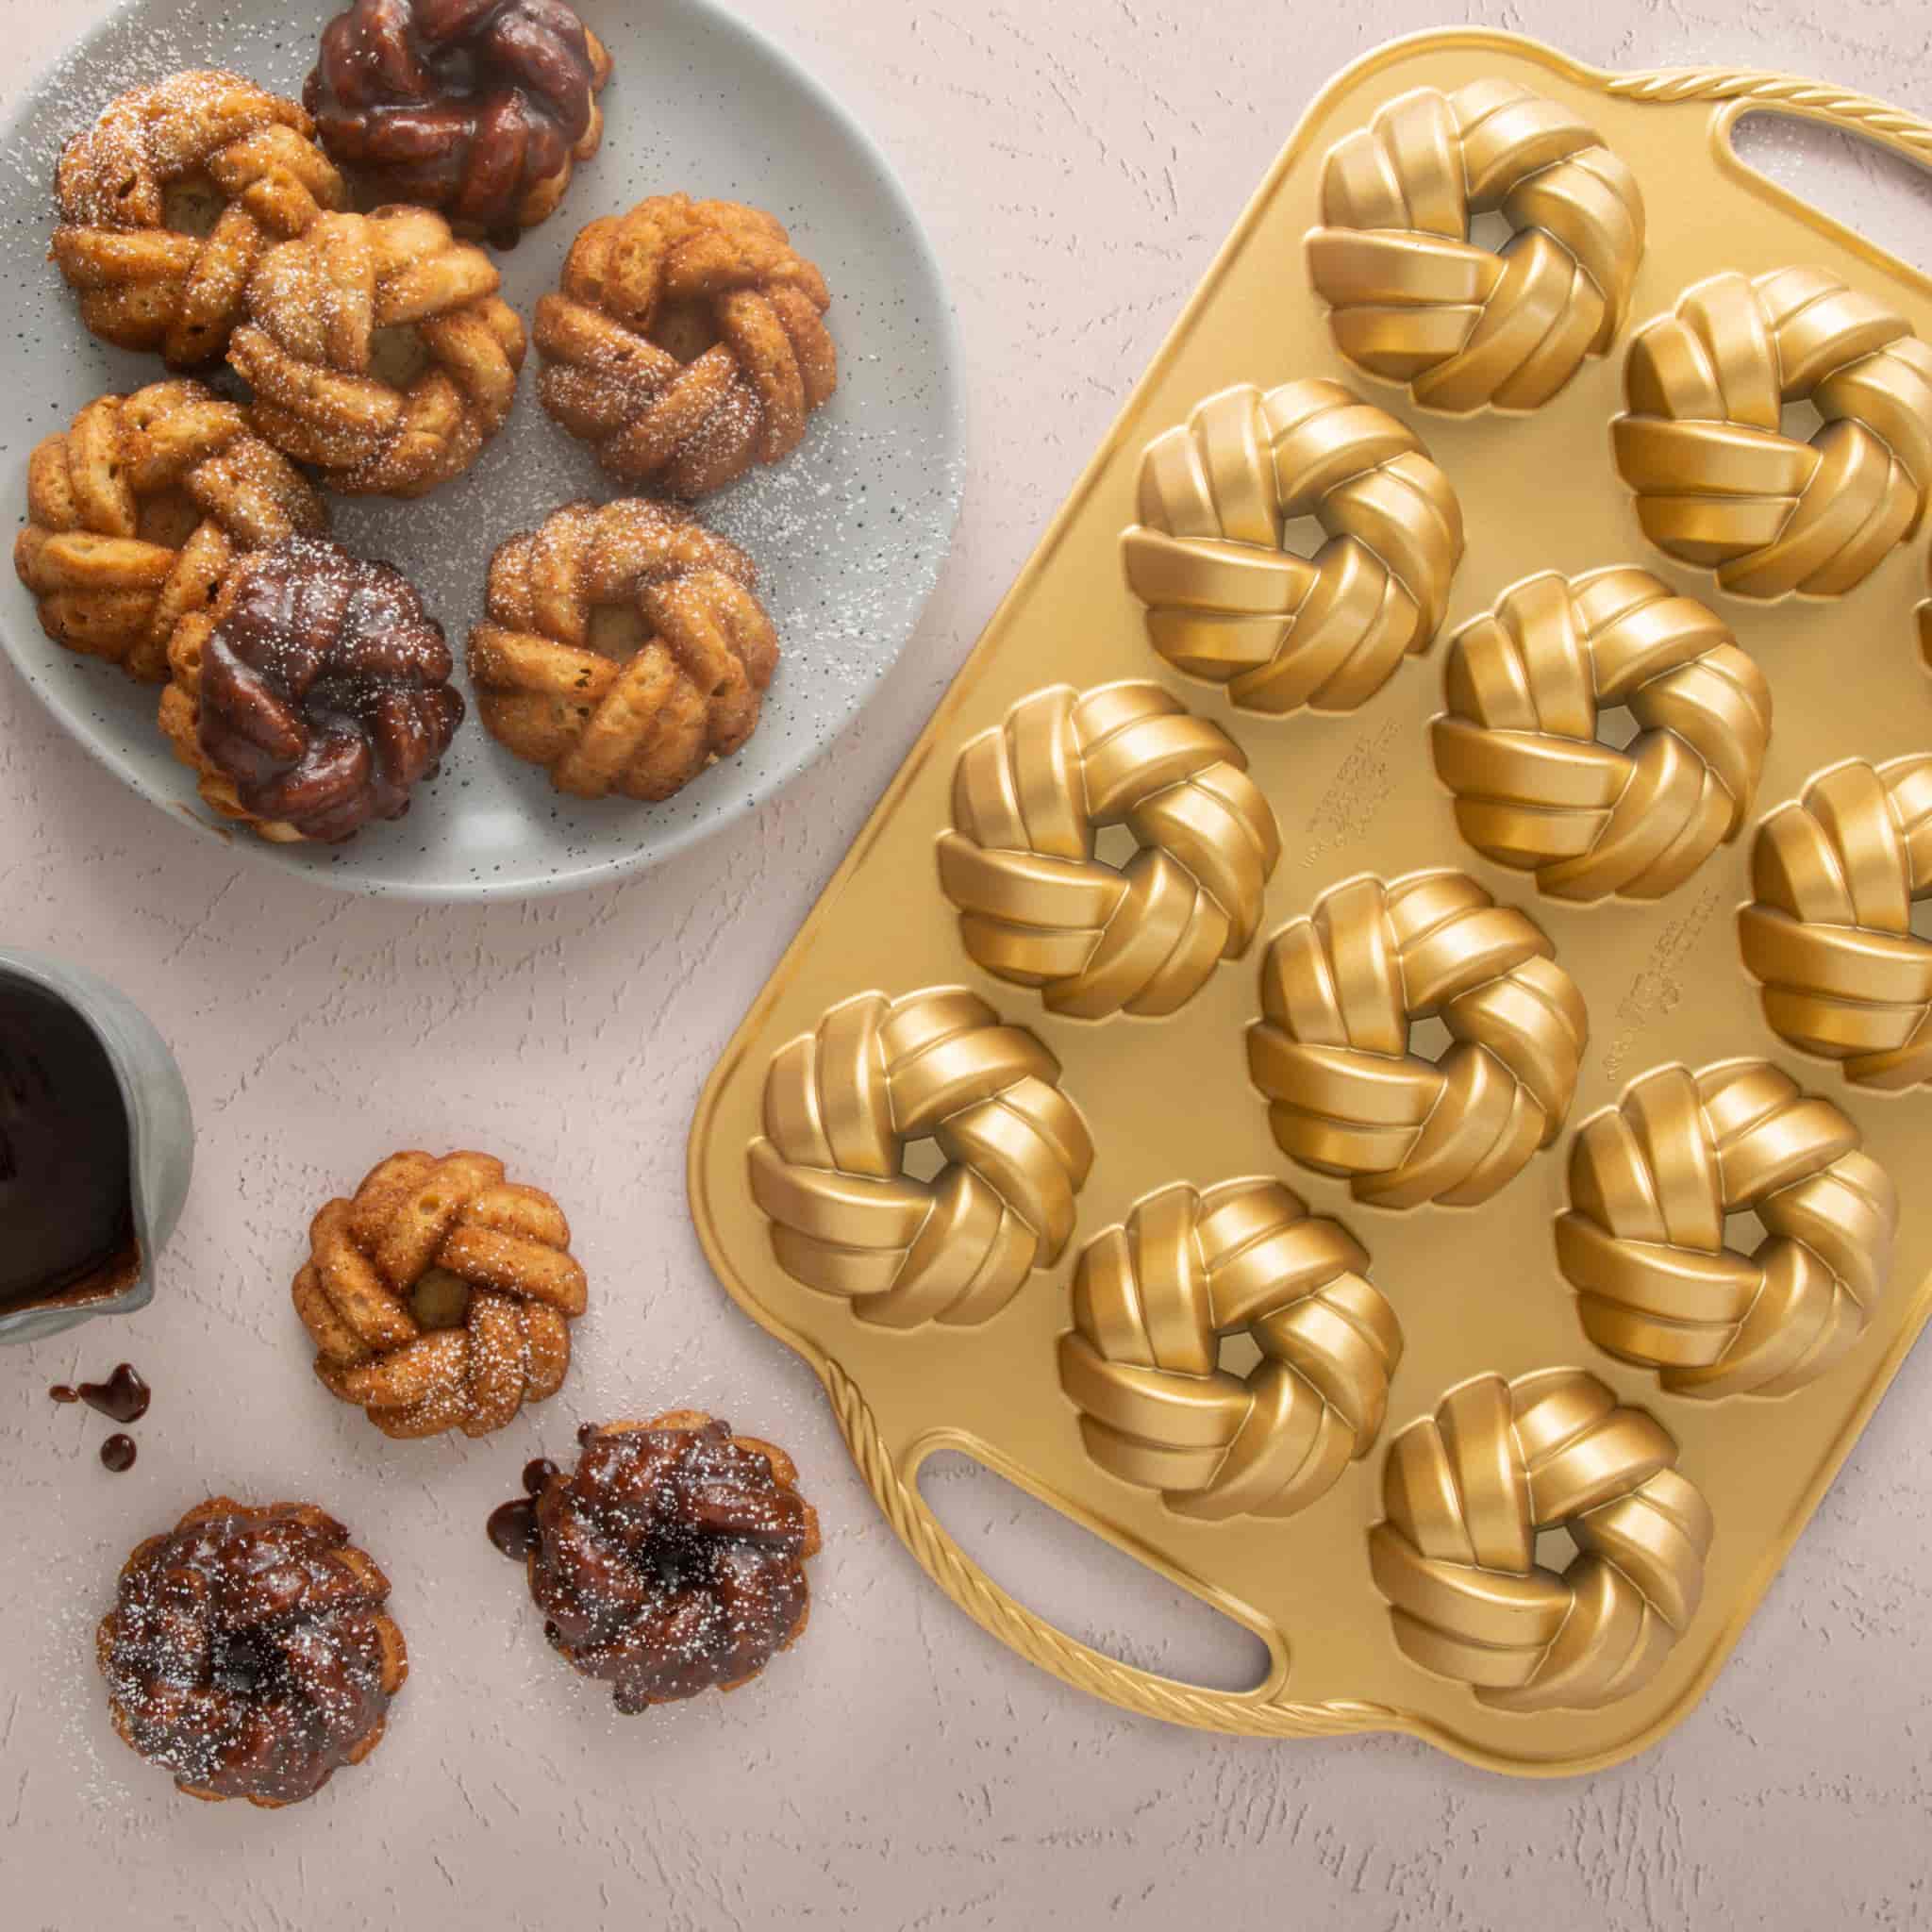 NordicWare Gold Braided Mini Bundt Pan with cakes